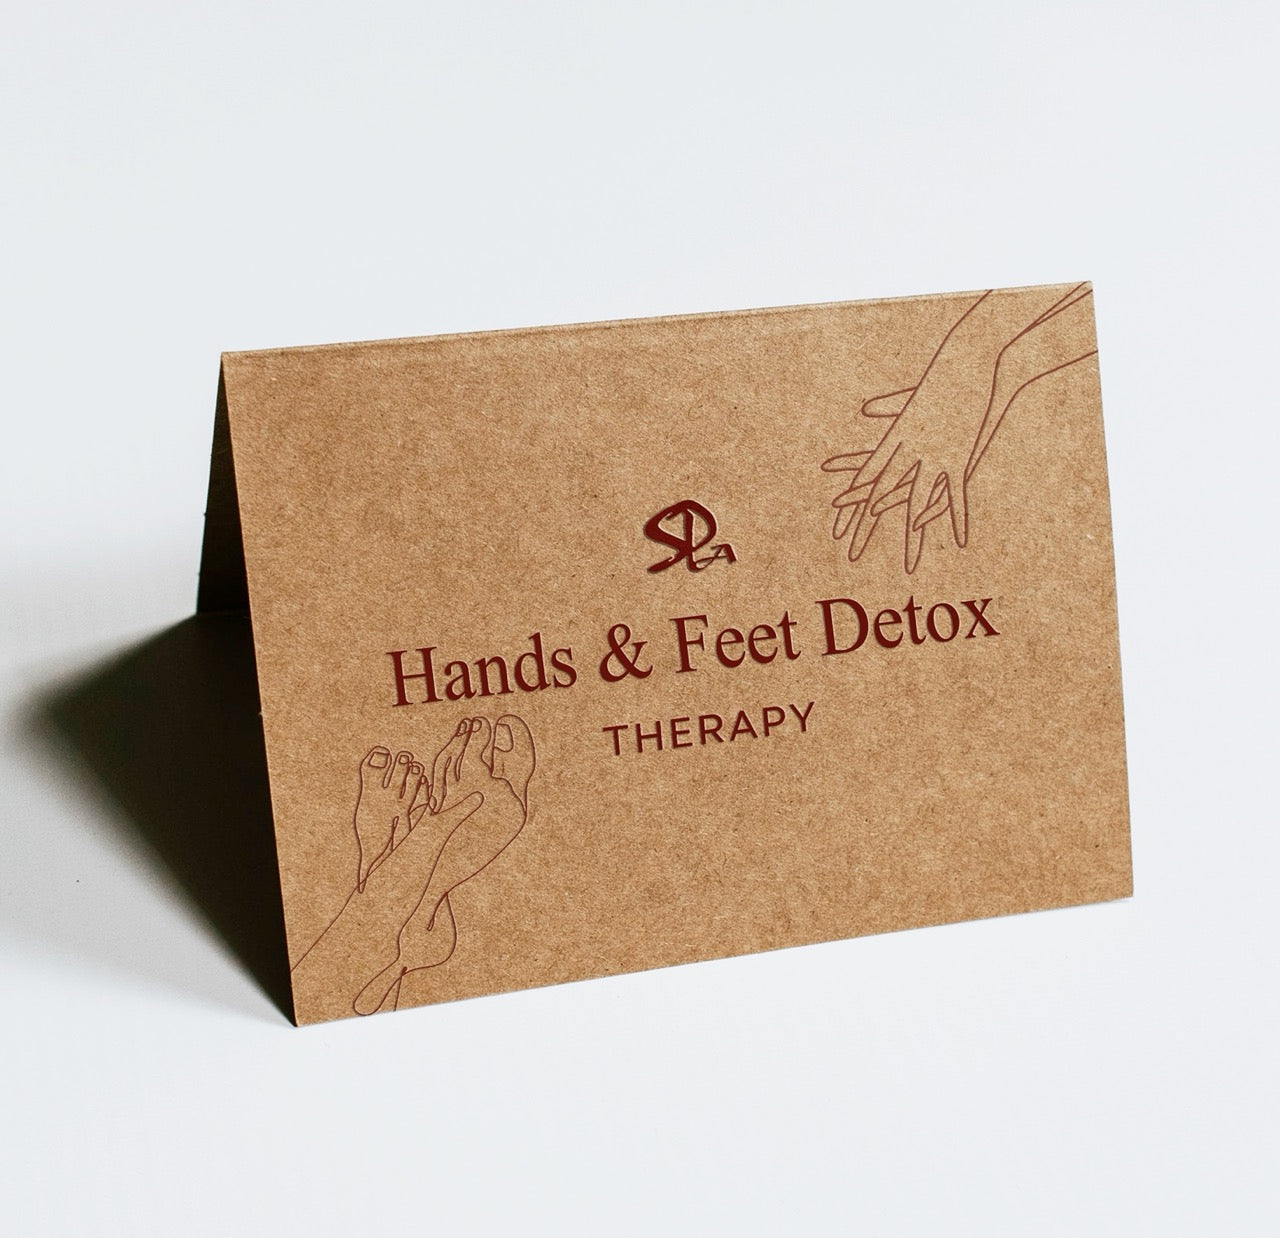 Hand & Foot Detox Therapy